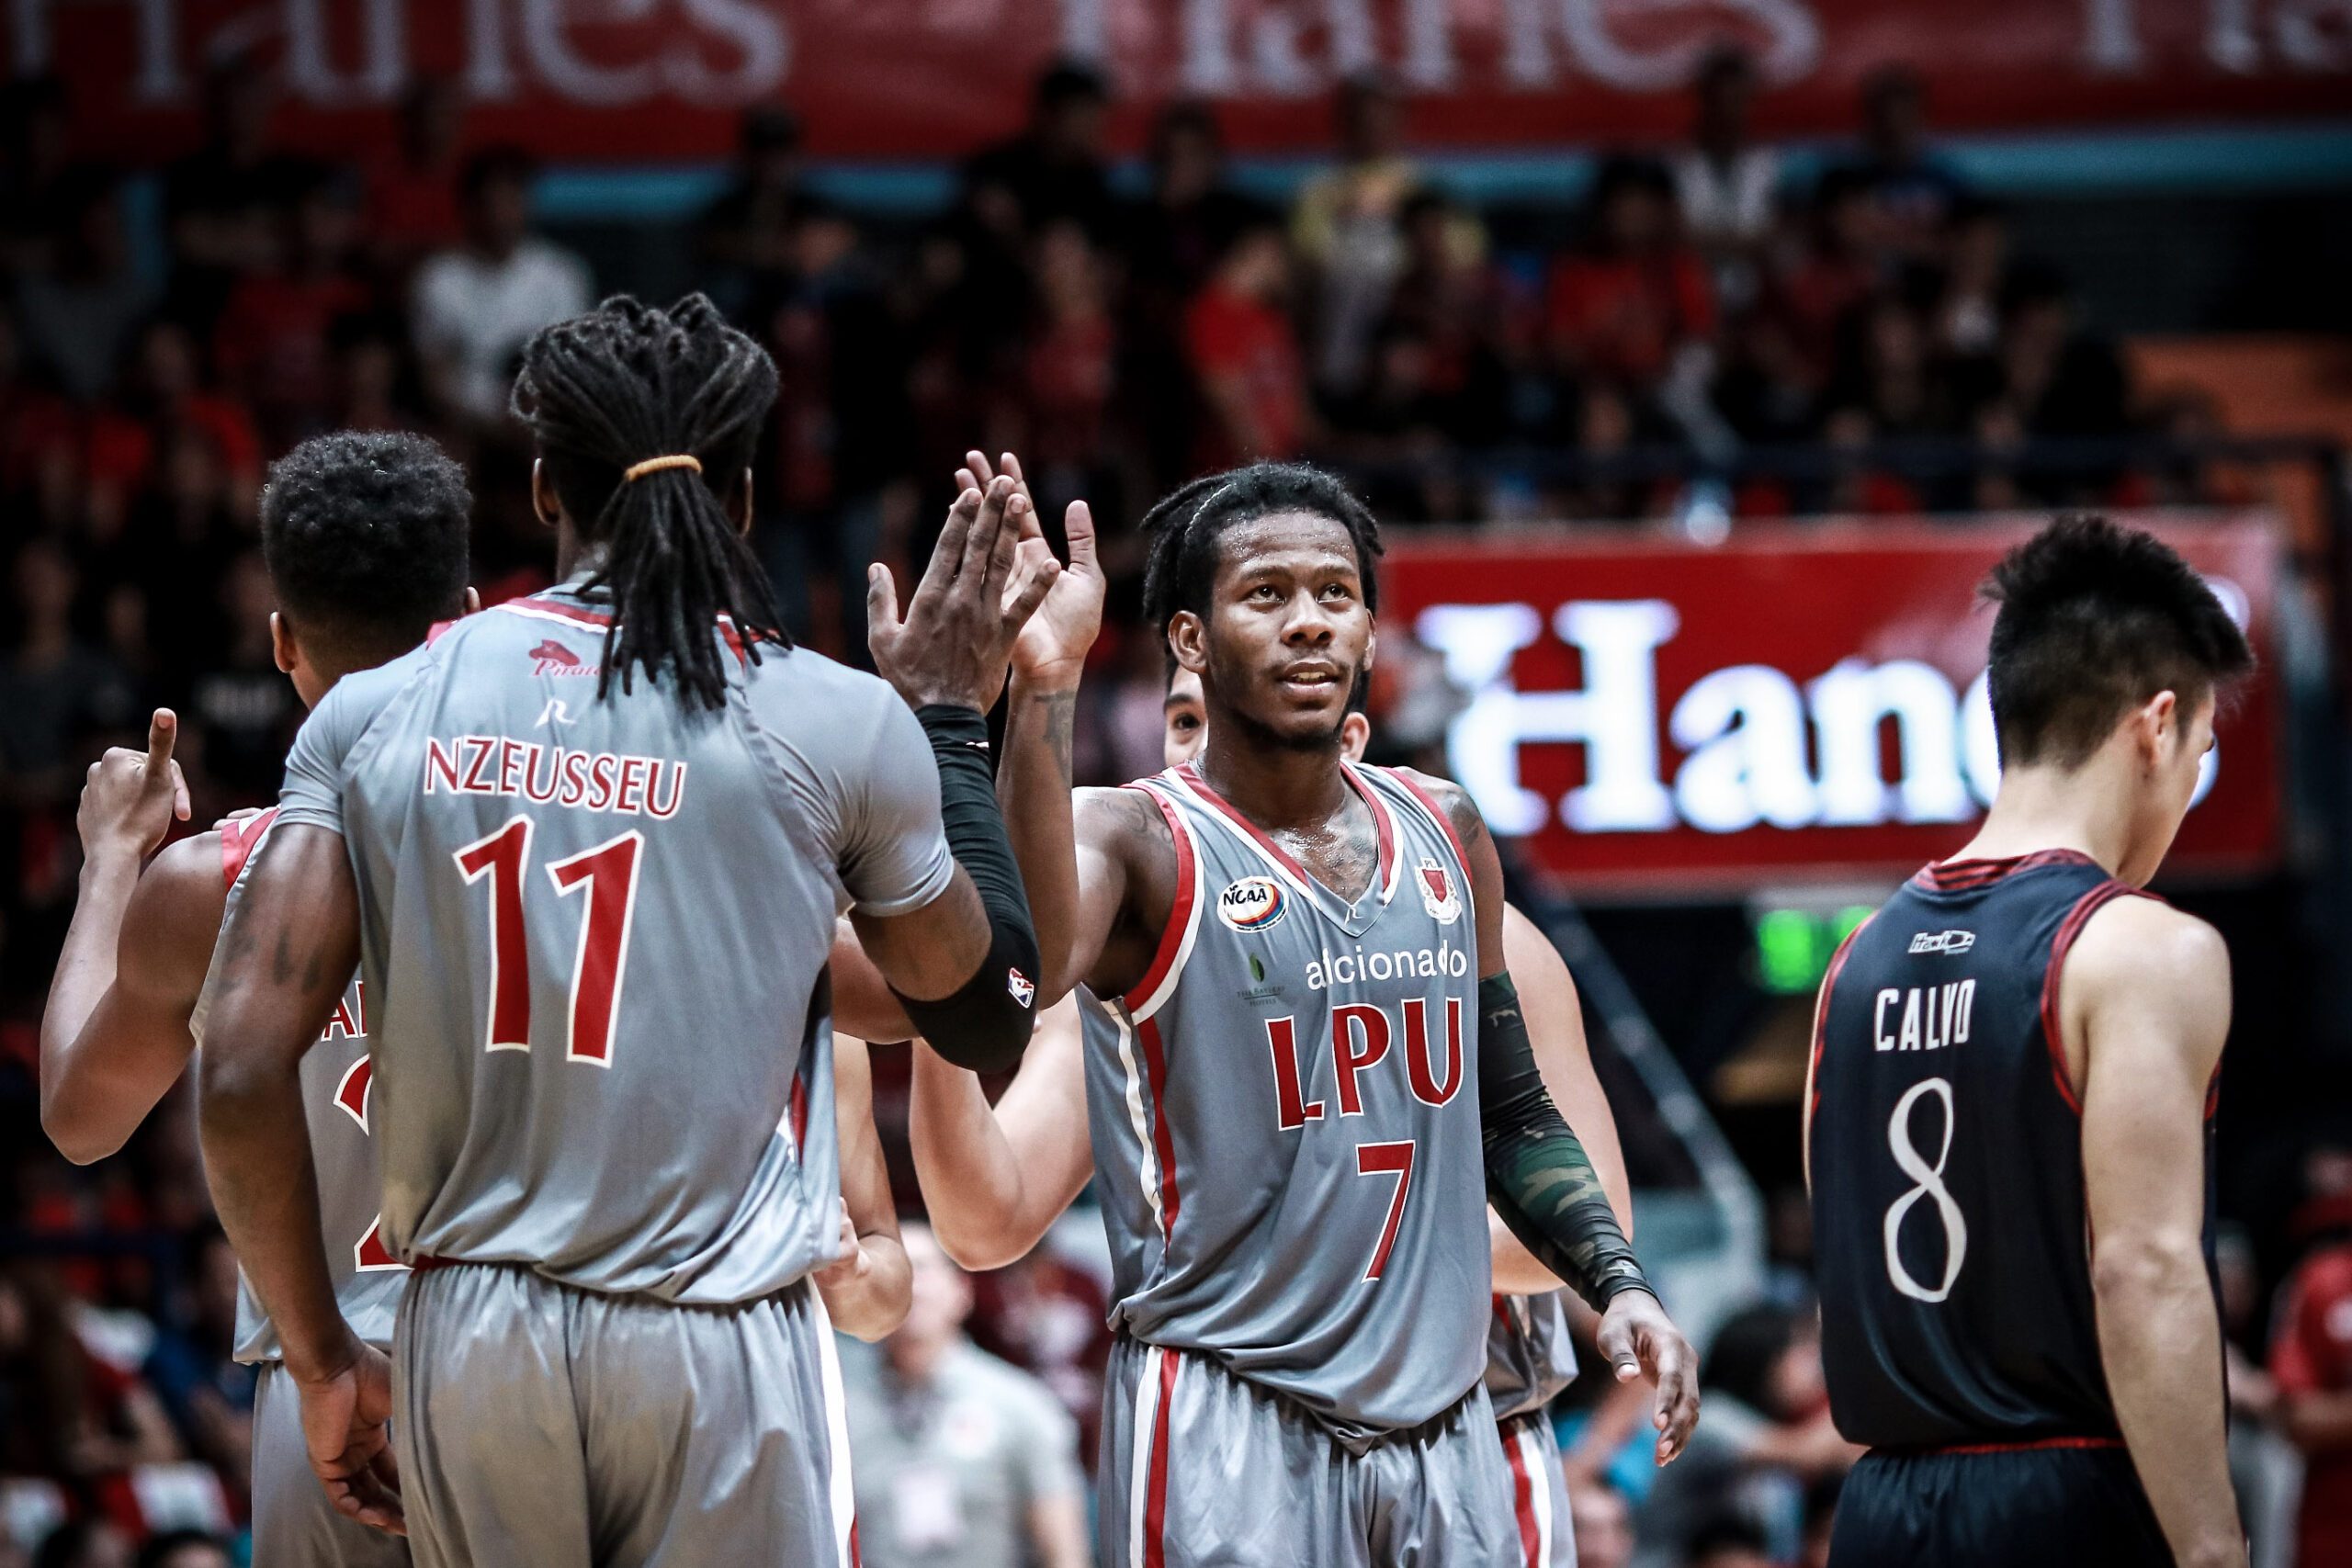 Lyceum overwhelms Letran, coasts to 2nd straight NCAA Finals